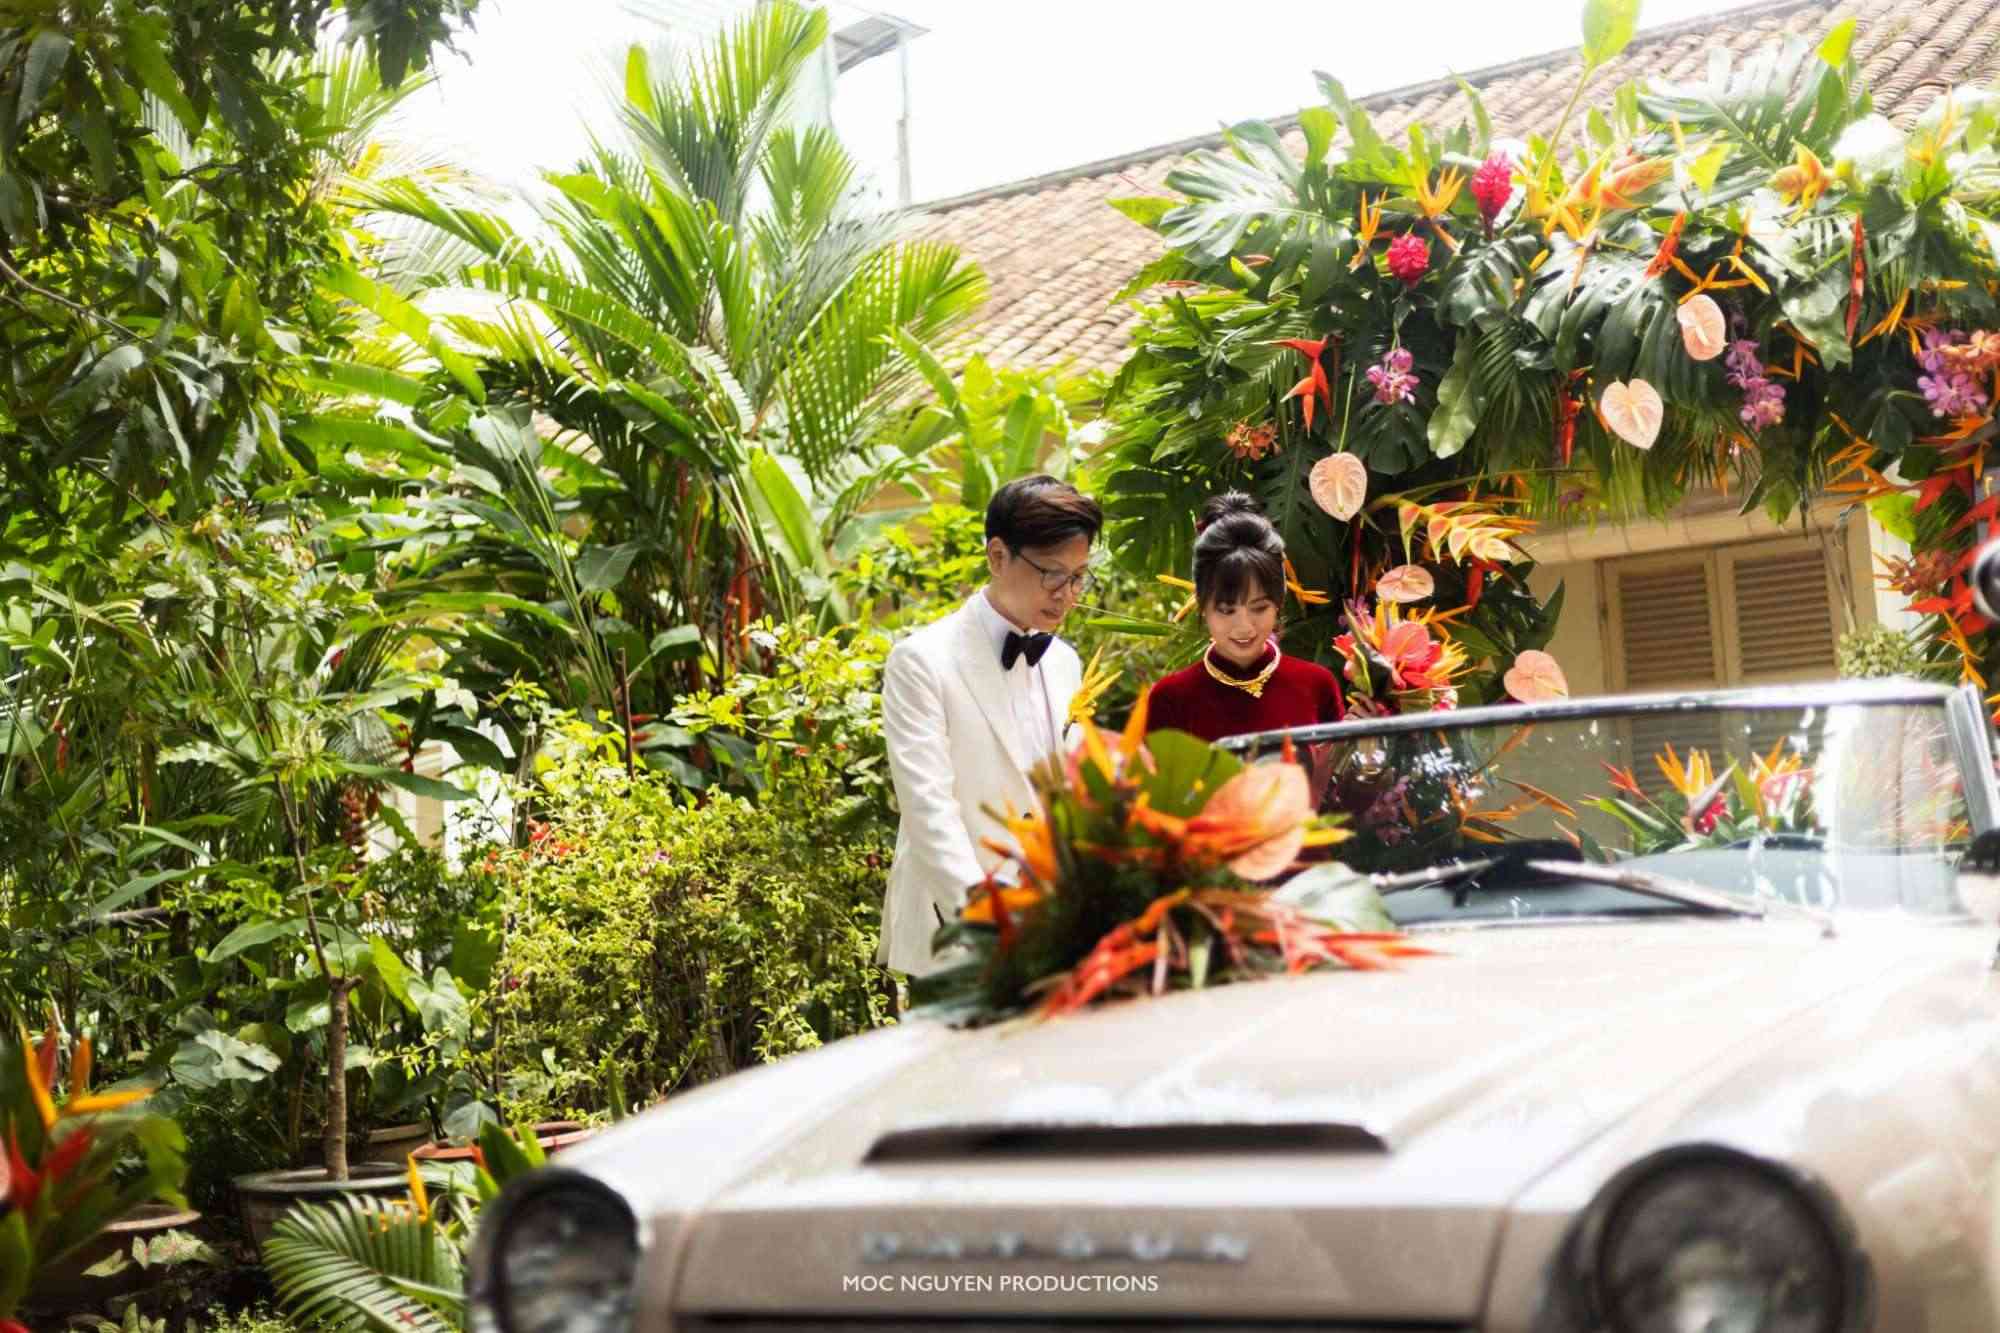 The convertible used to pick up the bride.